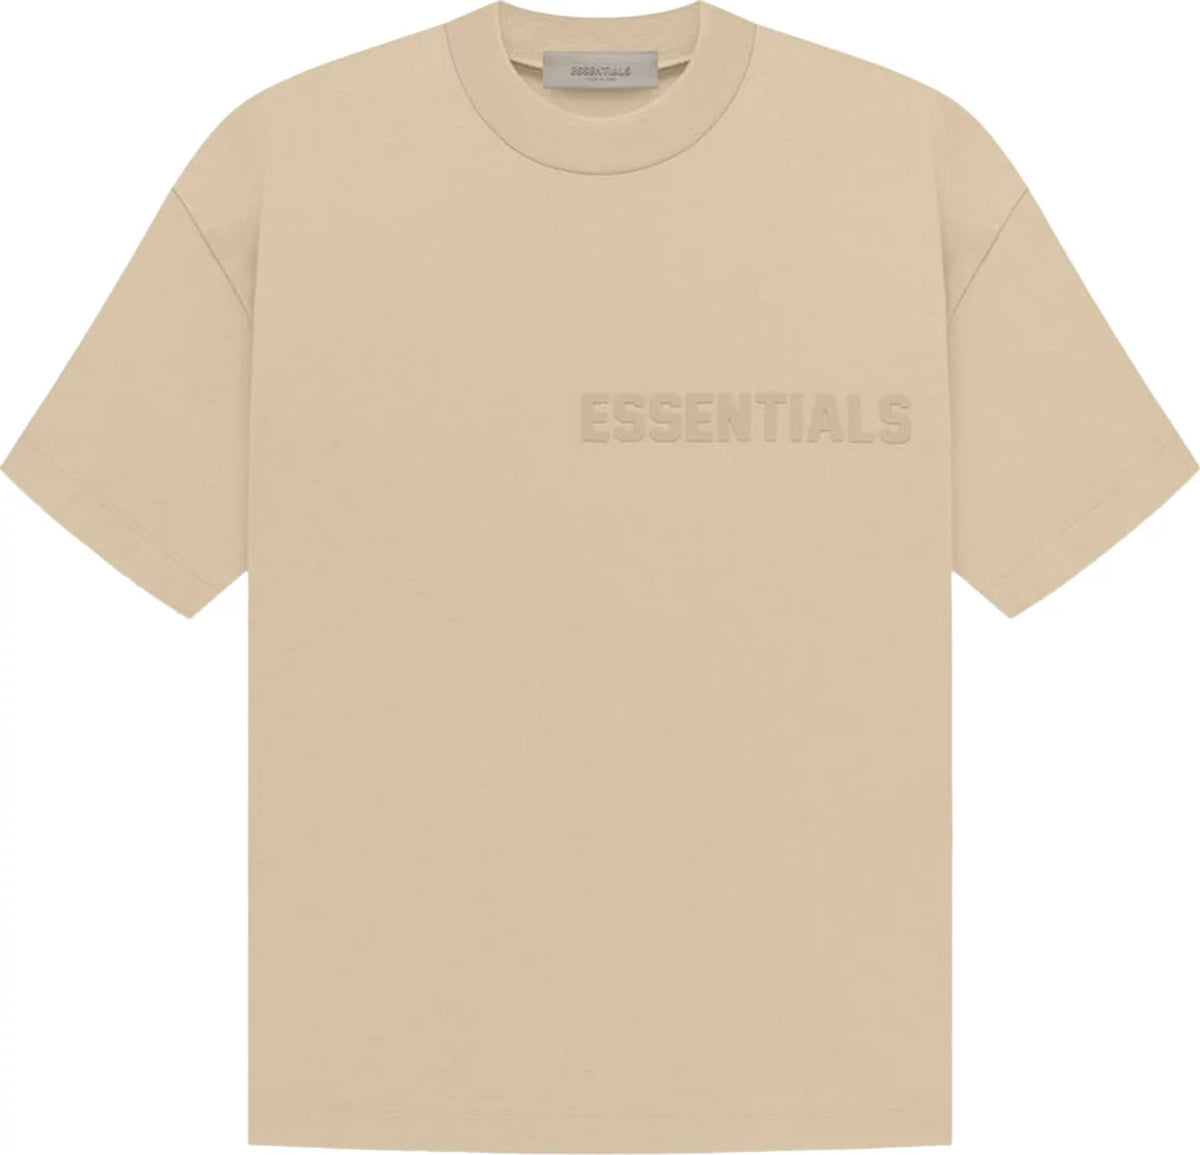 Fear of God Essentials SS Tee 'Sand'